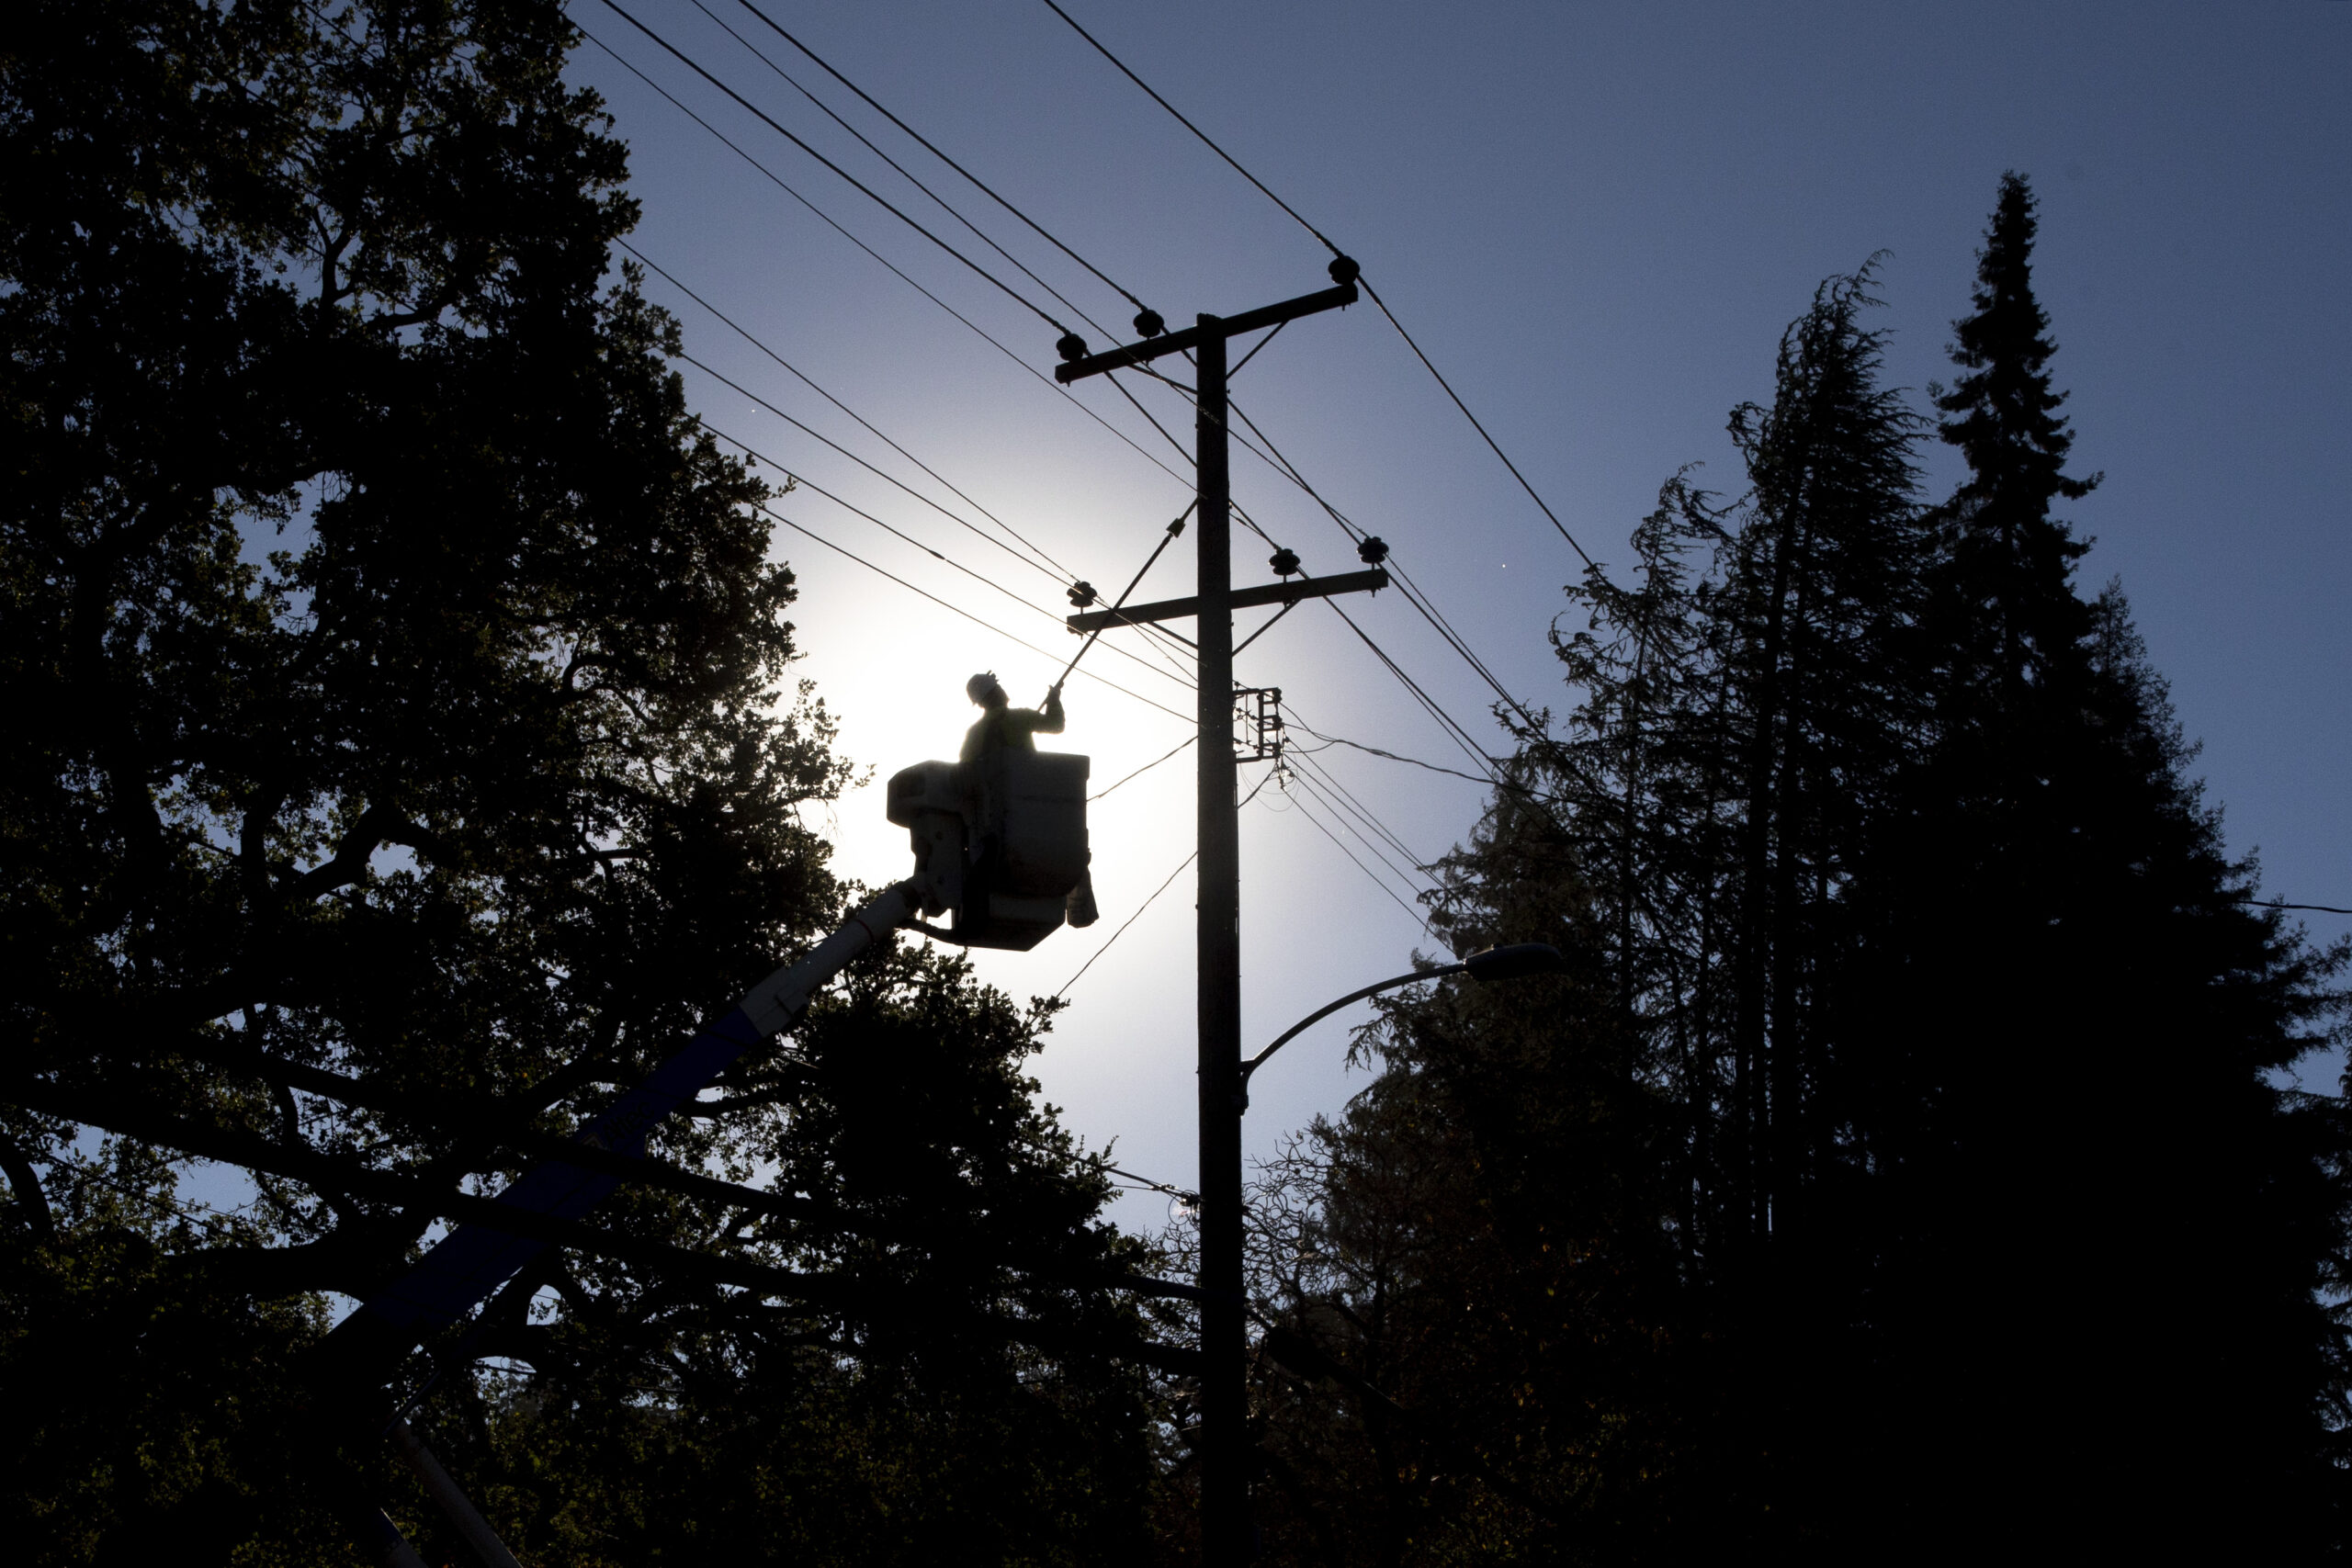 Pacific Gas and Electric (PG&amp;E) line inspector Kevin Ogans works to clear lines so crews can begin removing a tree that crashed into live power lines along Mountain Boulevard in the Montclair Village neighborhood of Oakland. | Jessica Christian/The San Francisco Chronicle via Getty Images